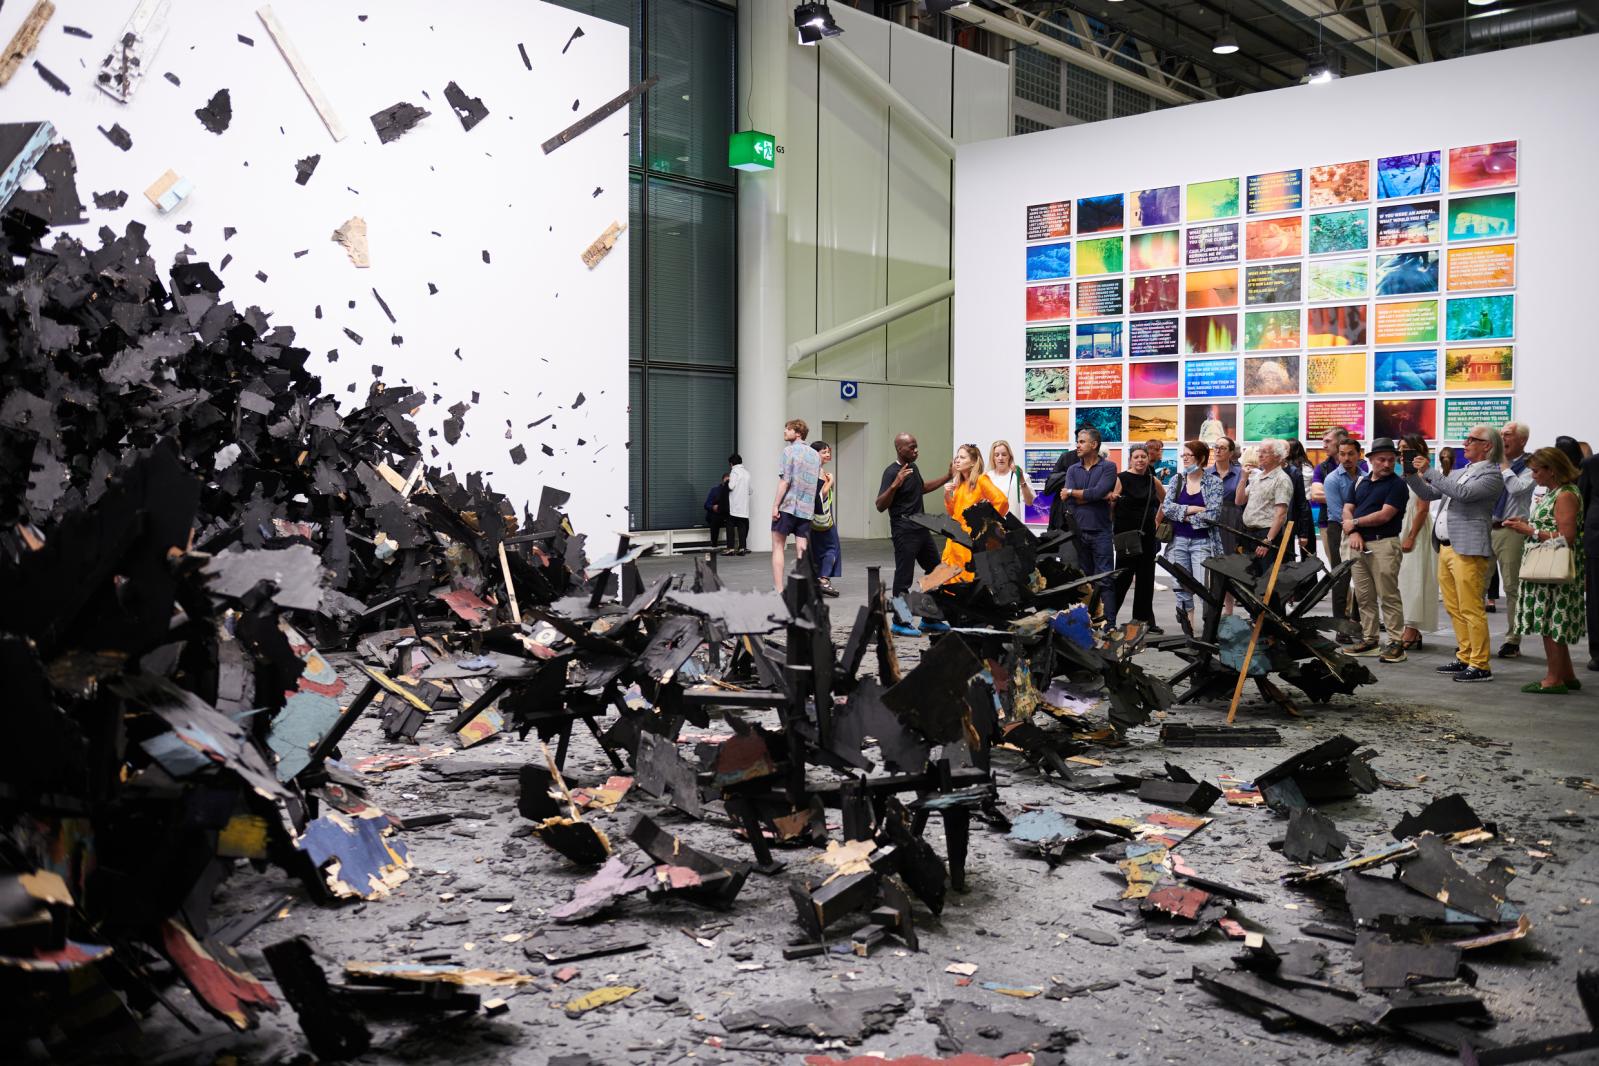 Report: Art Basel Confirms the Market's Rosy Health 